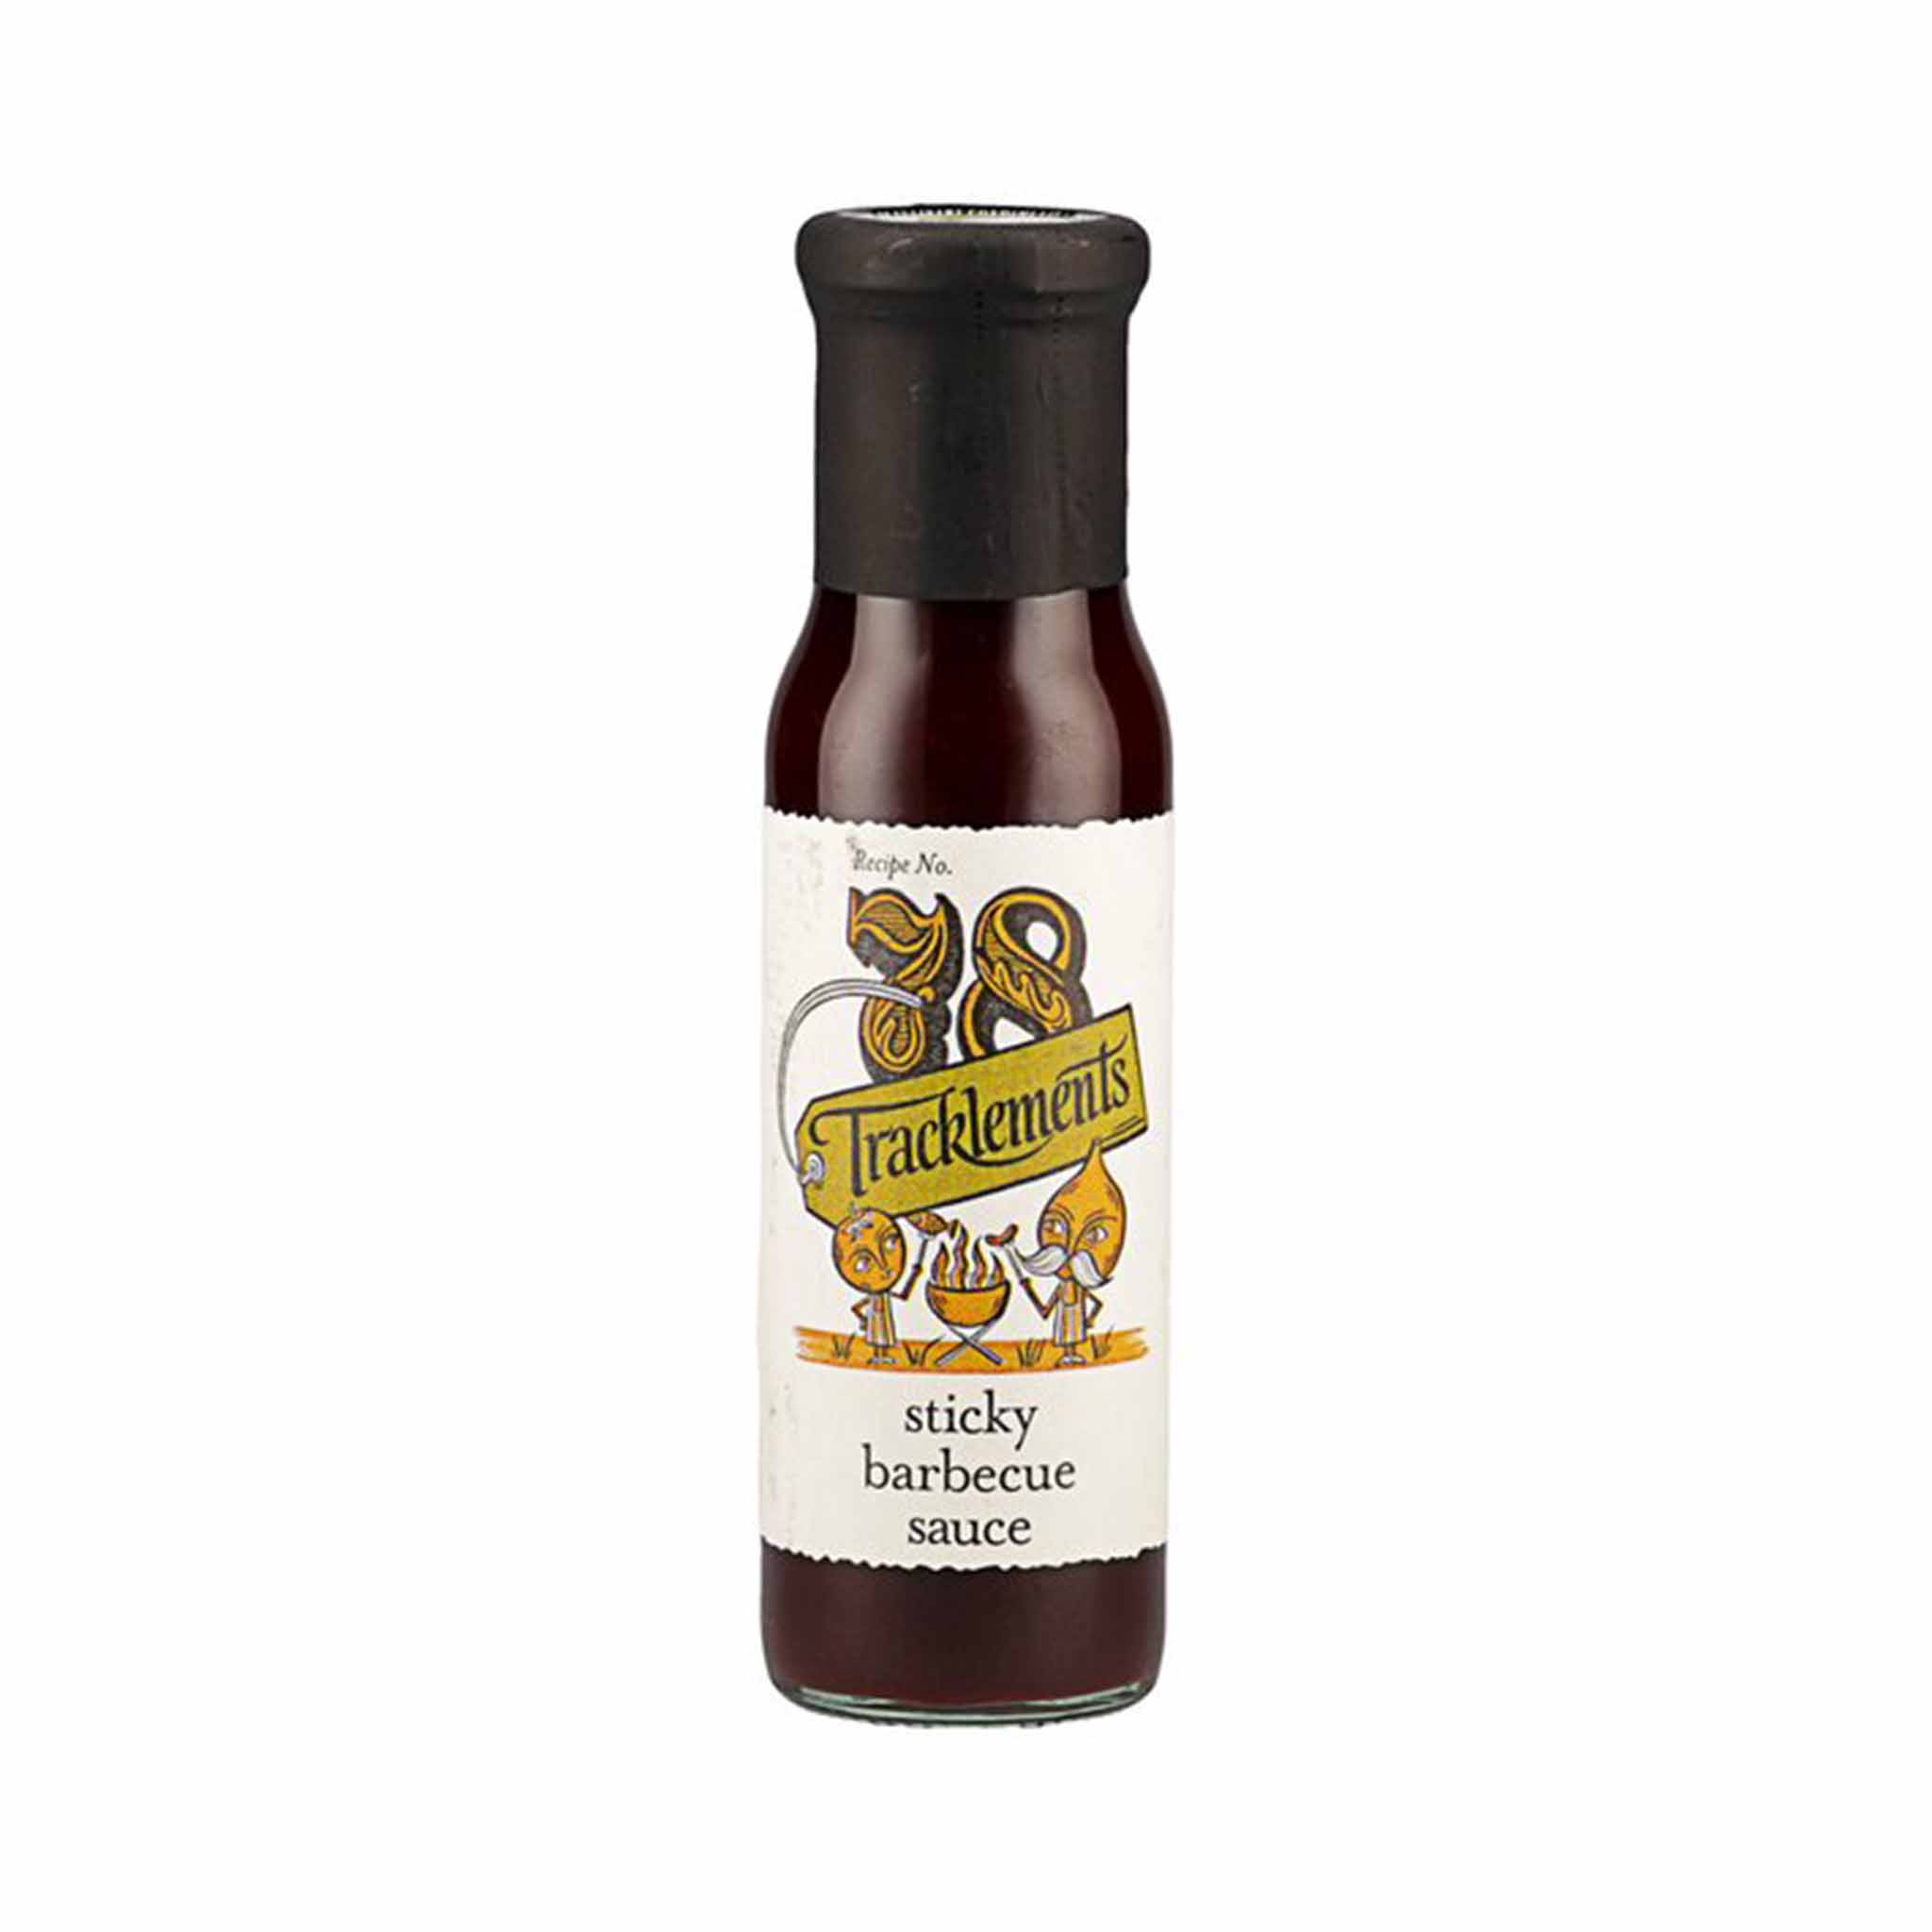 Tracklements Sticky Barbecue Sauce